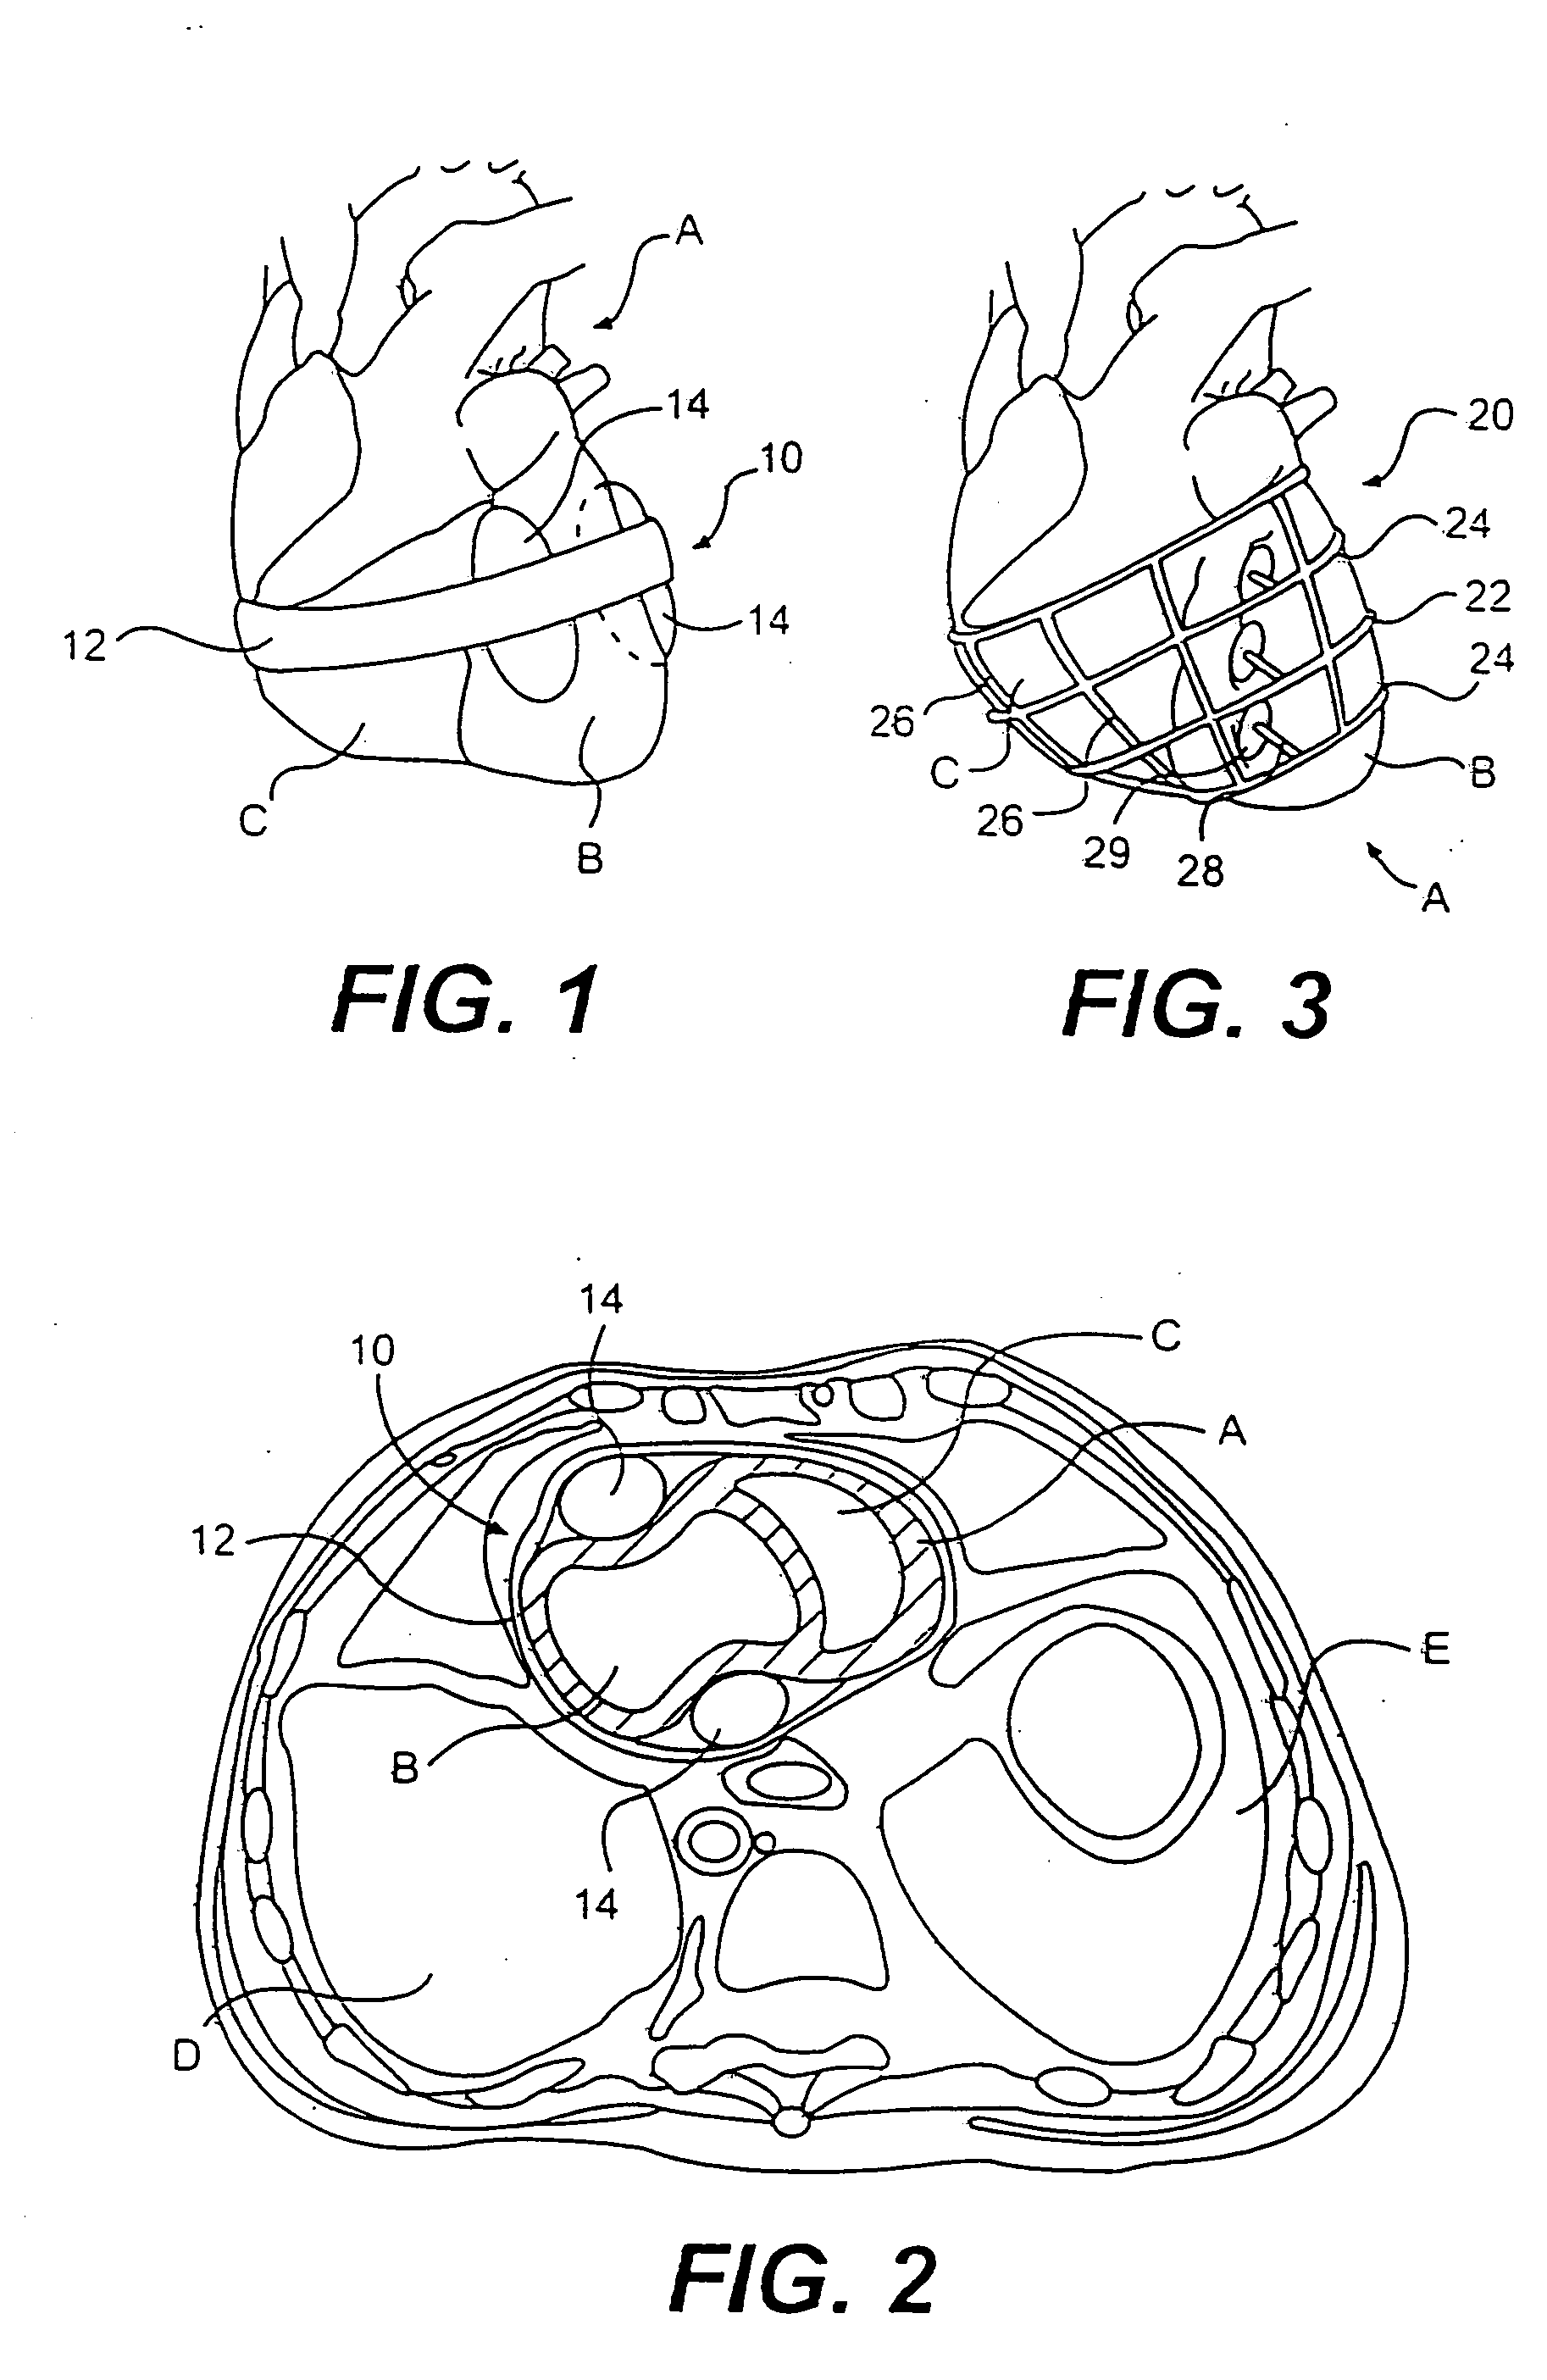 External stress reduction device and method